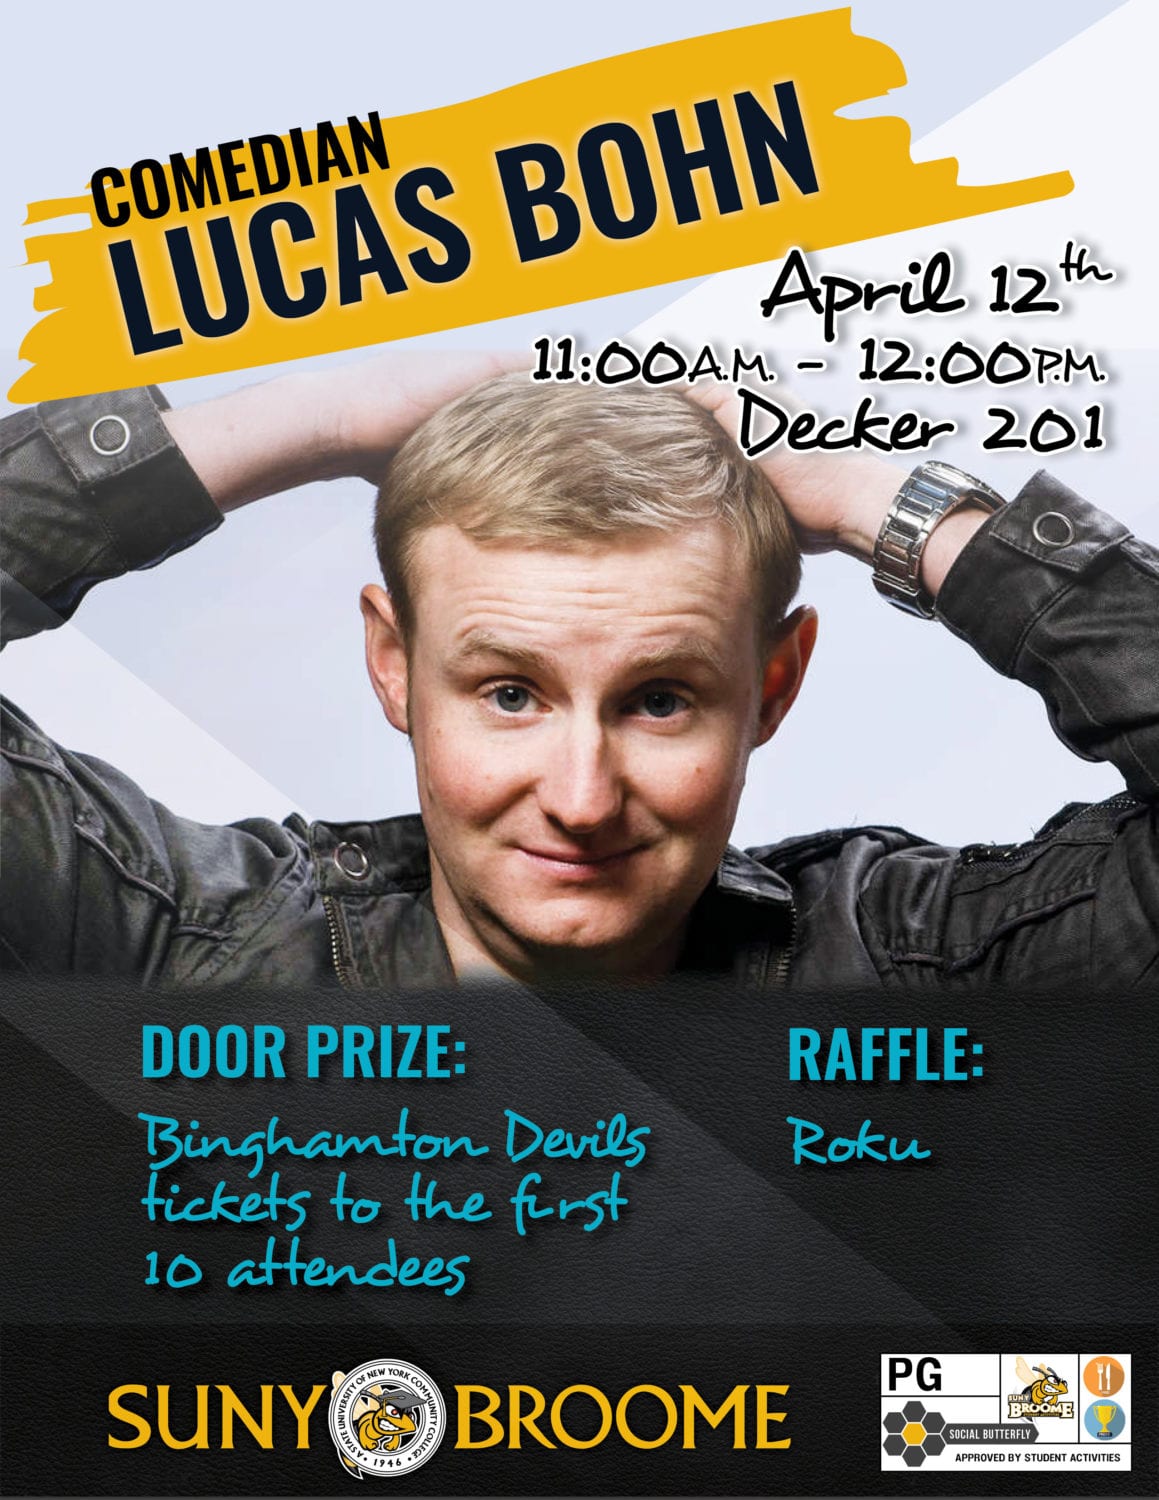 Lunchtime laugh: See comedian Lucas Bohn on campus April 12